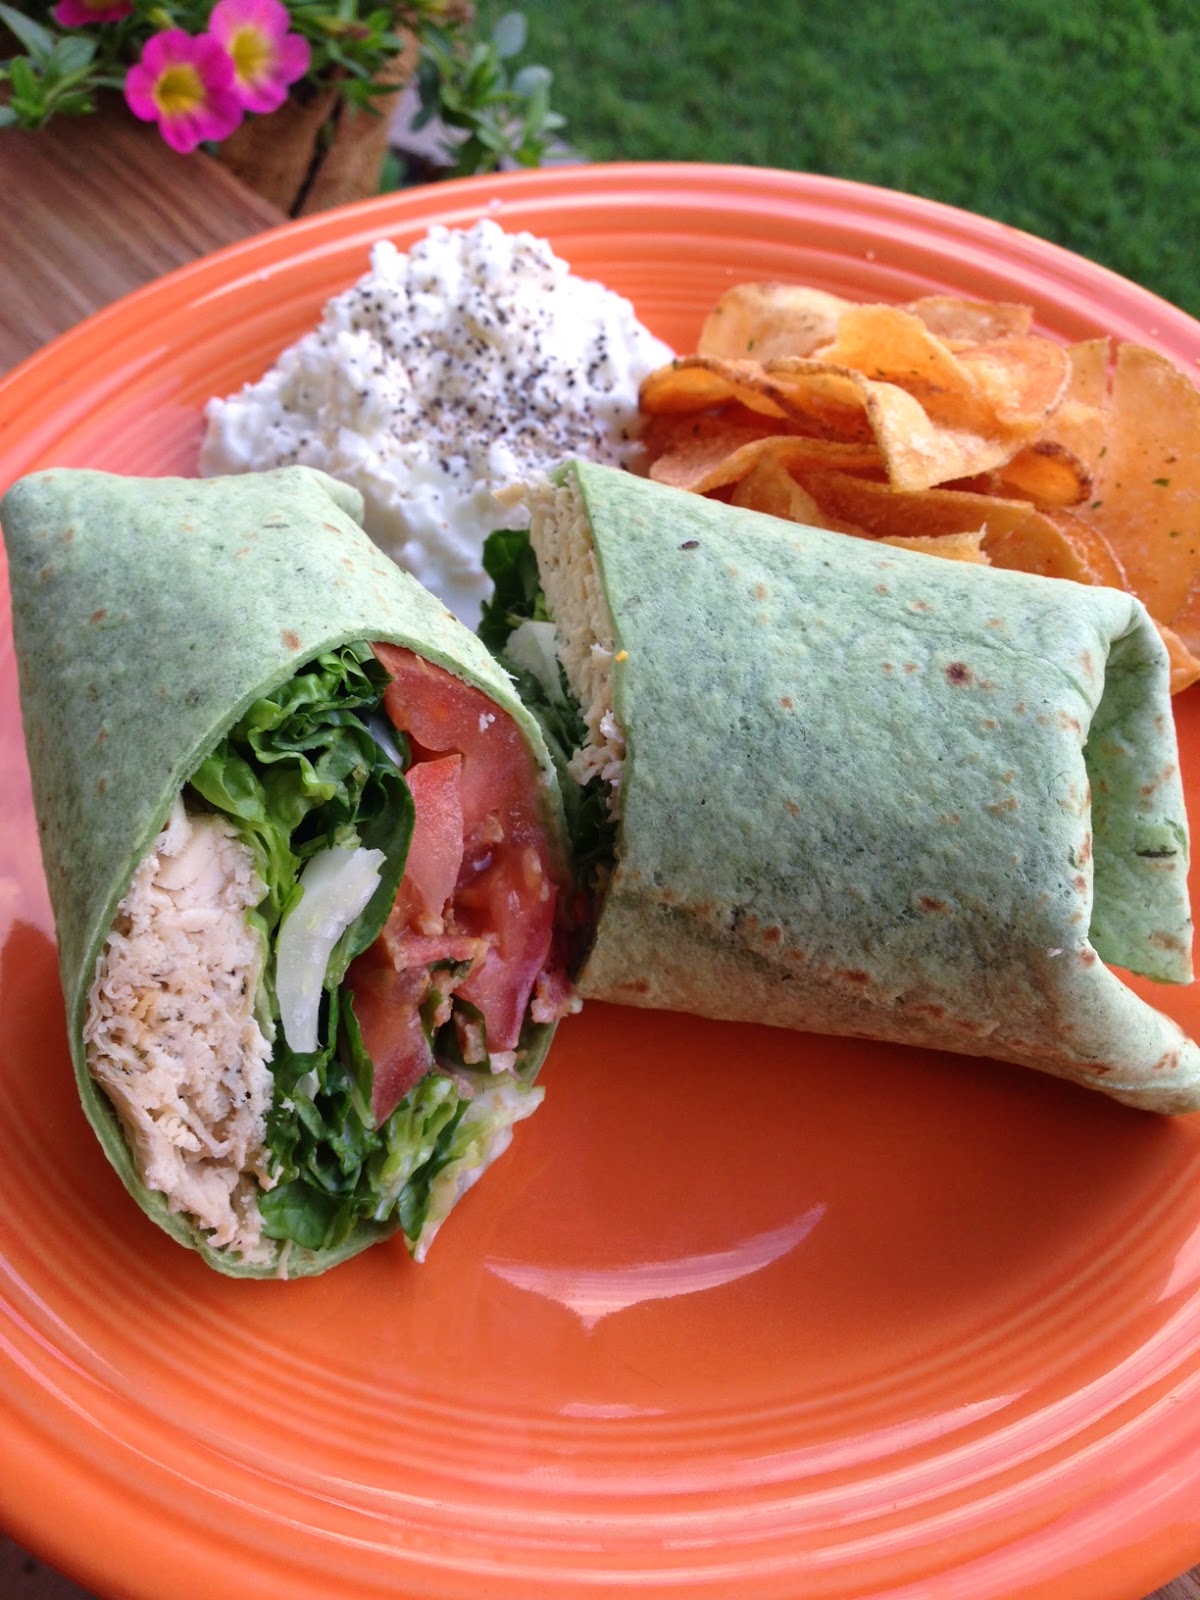 Married with pigs: BLT Ranch Chicken Wraps